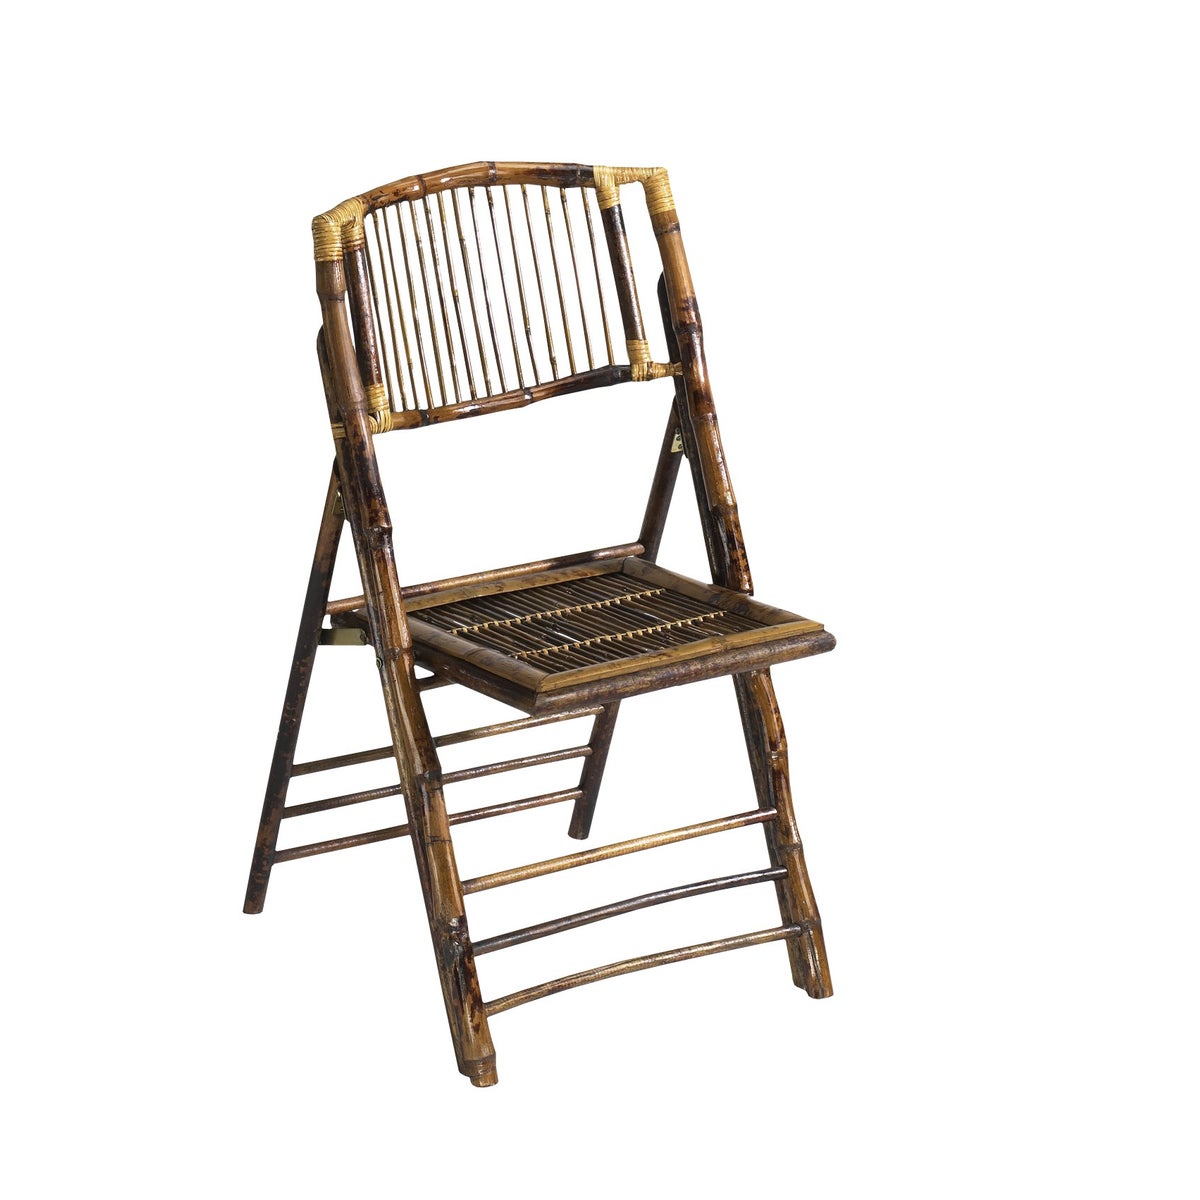 Folding Rattan Chair  Frame Color - Tortoise Gloss             SOLD AS A 4-PACK ONLY